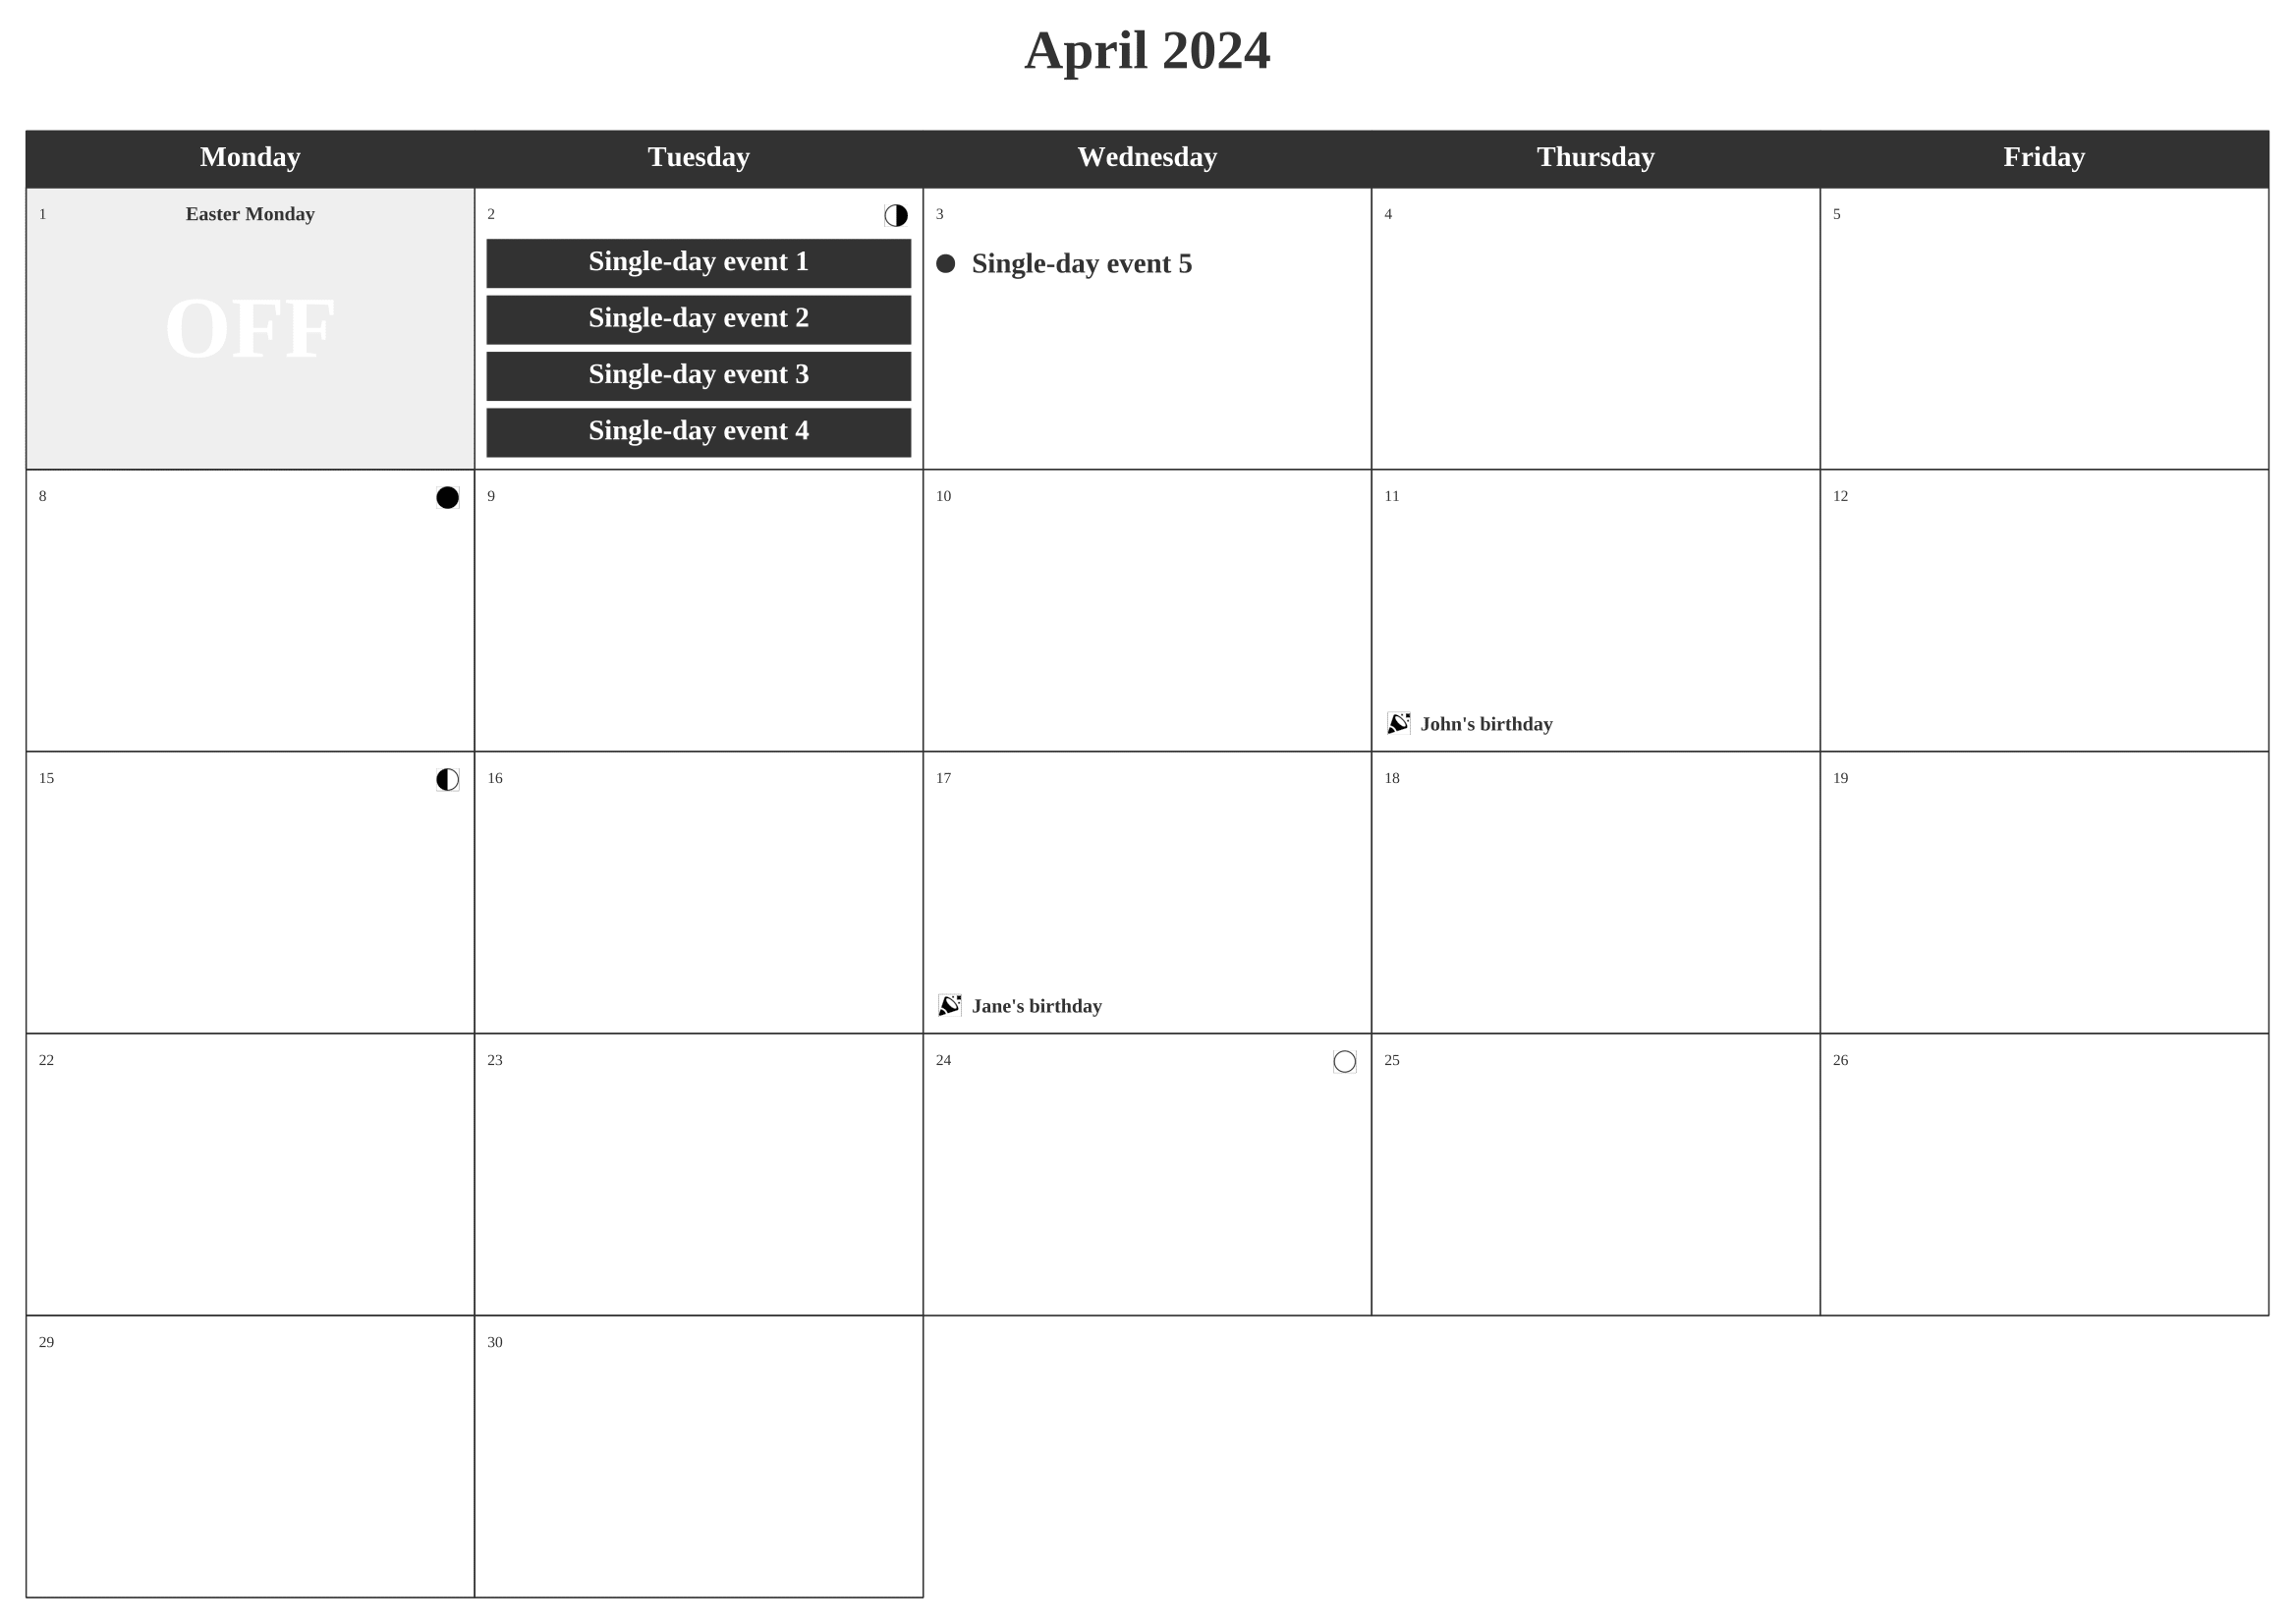 Monthly calendar - Single-day events (bis)